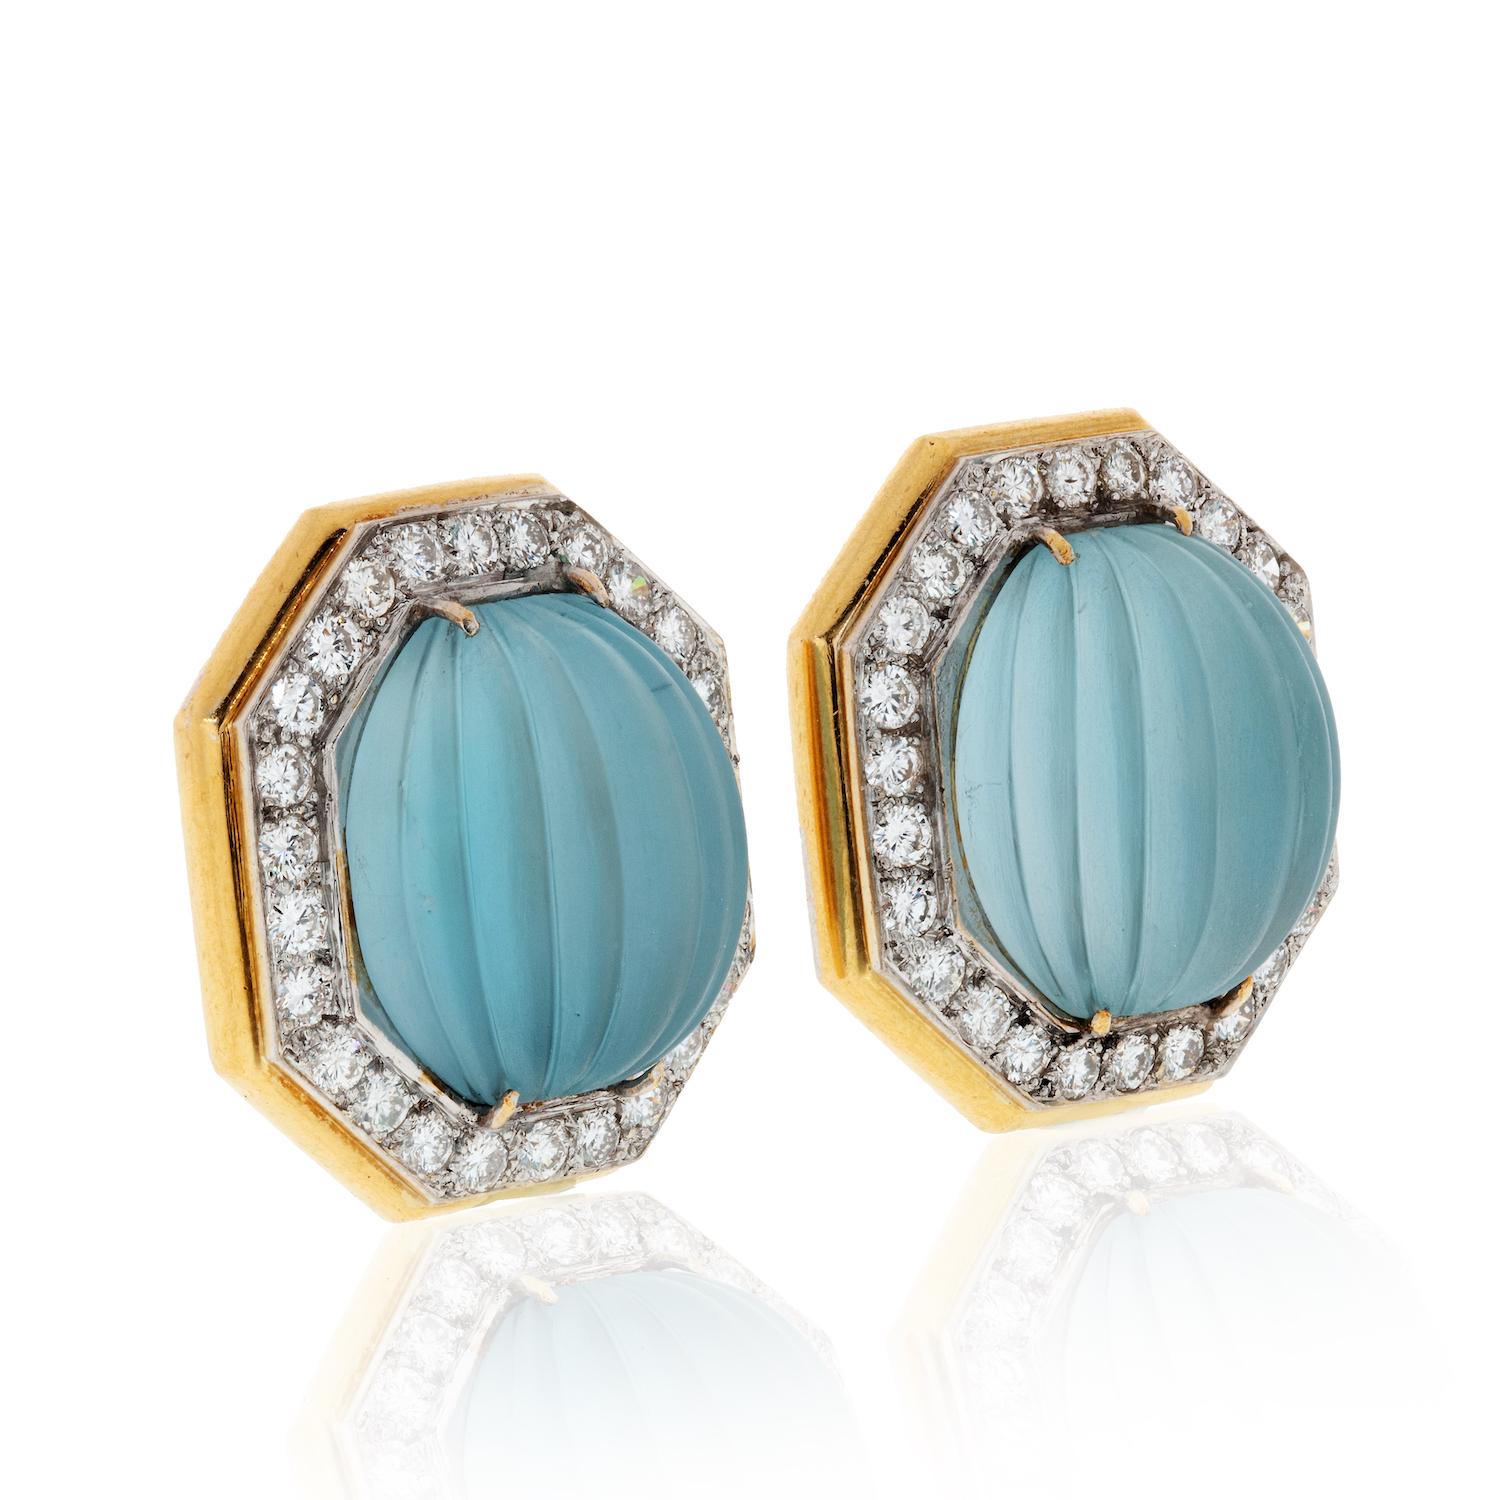 Wander Pair of Two-Color Gold, Carved Aquamarine and Diamond Earclips

Mounted in gold and platinum these wonderful earrings are set with fluted frosted aquamarines and pave round diamonds of approx. 3.10cts.
Aquamarines: light-medium blue color and